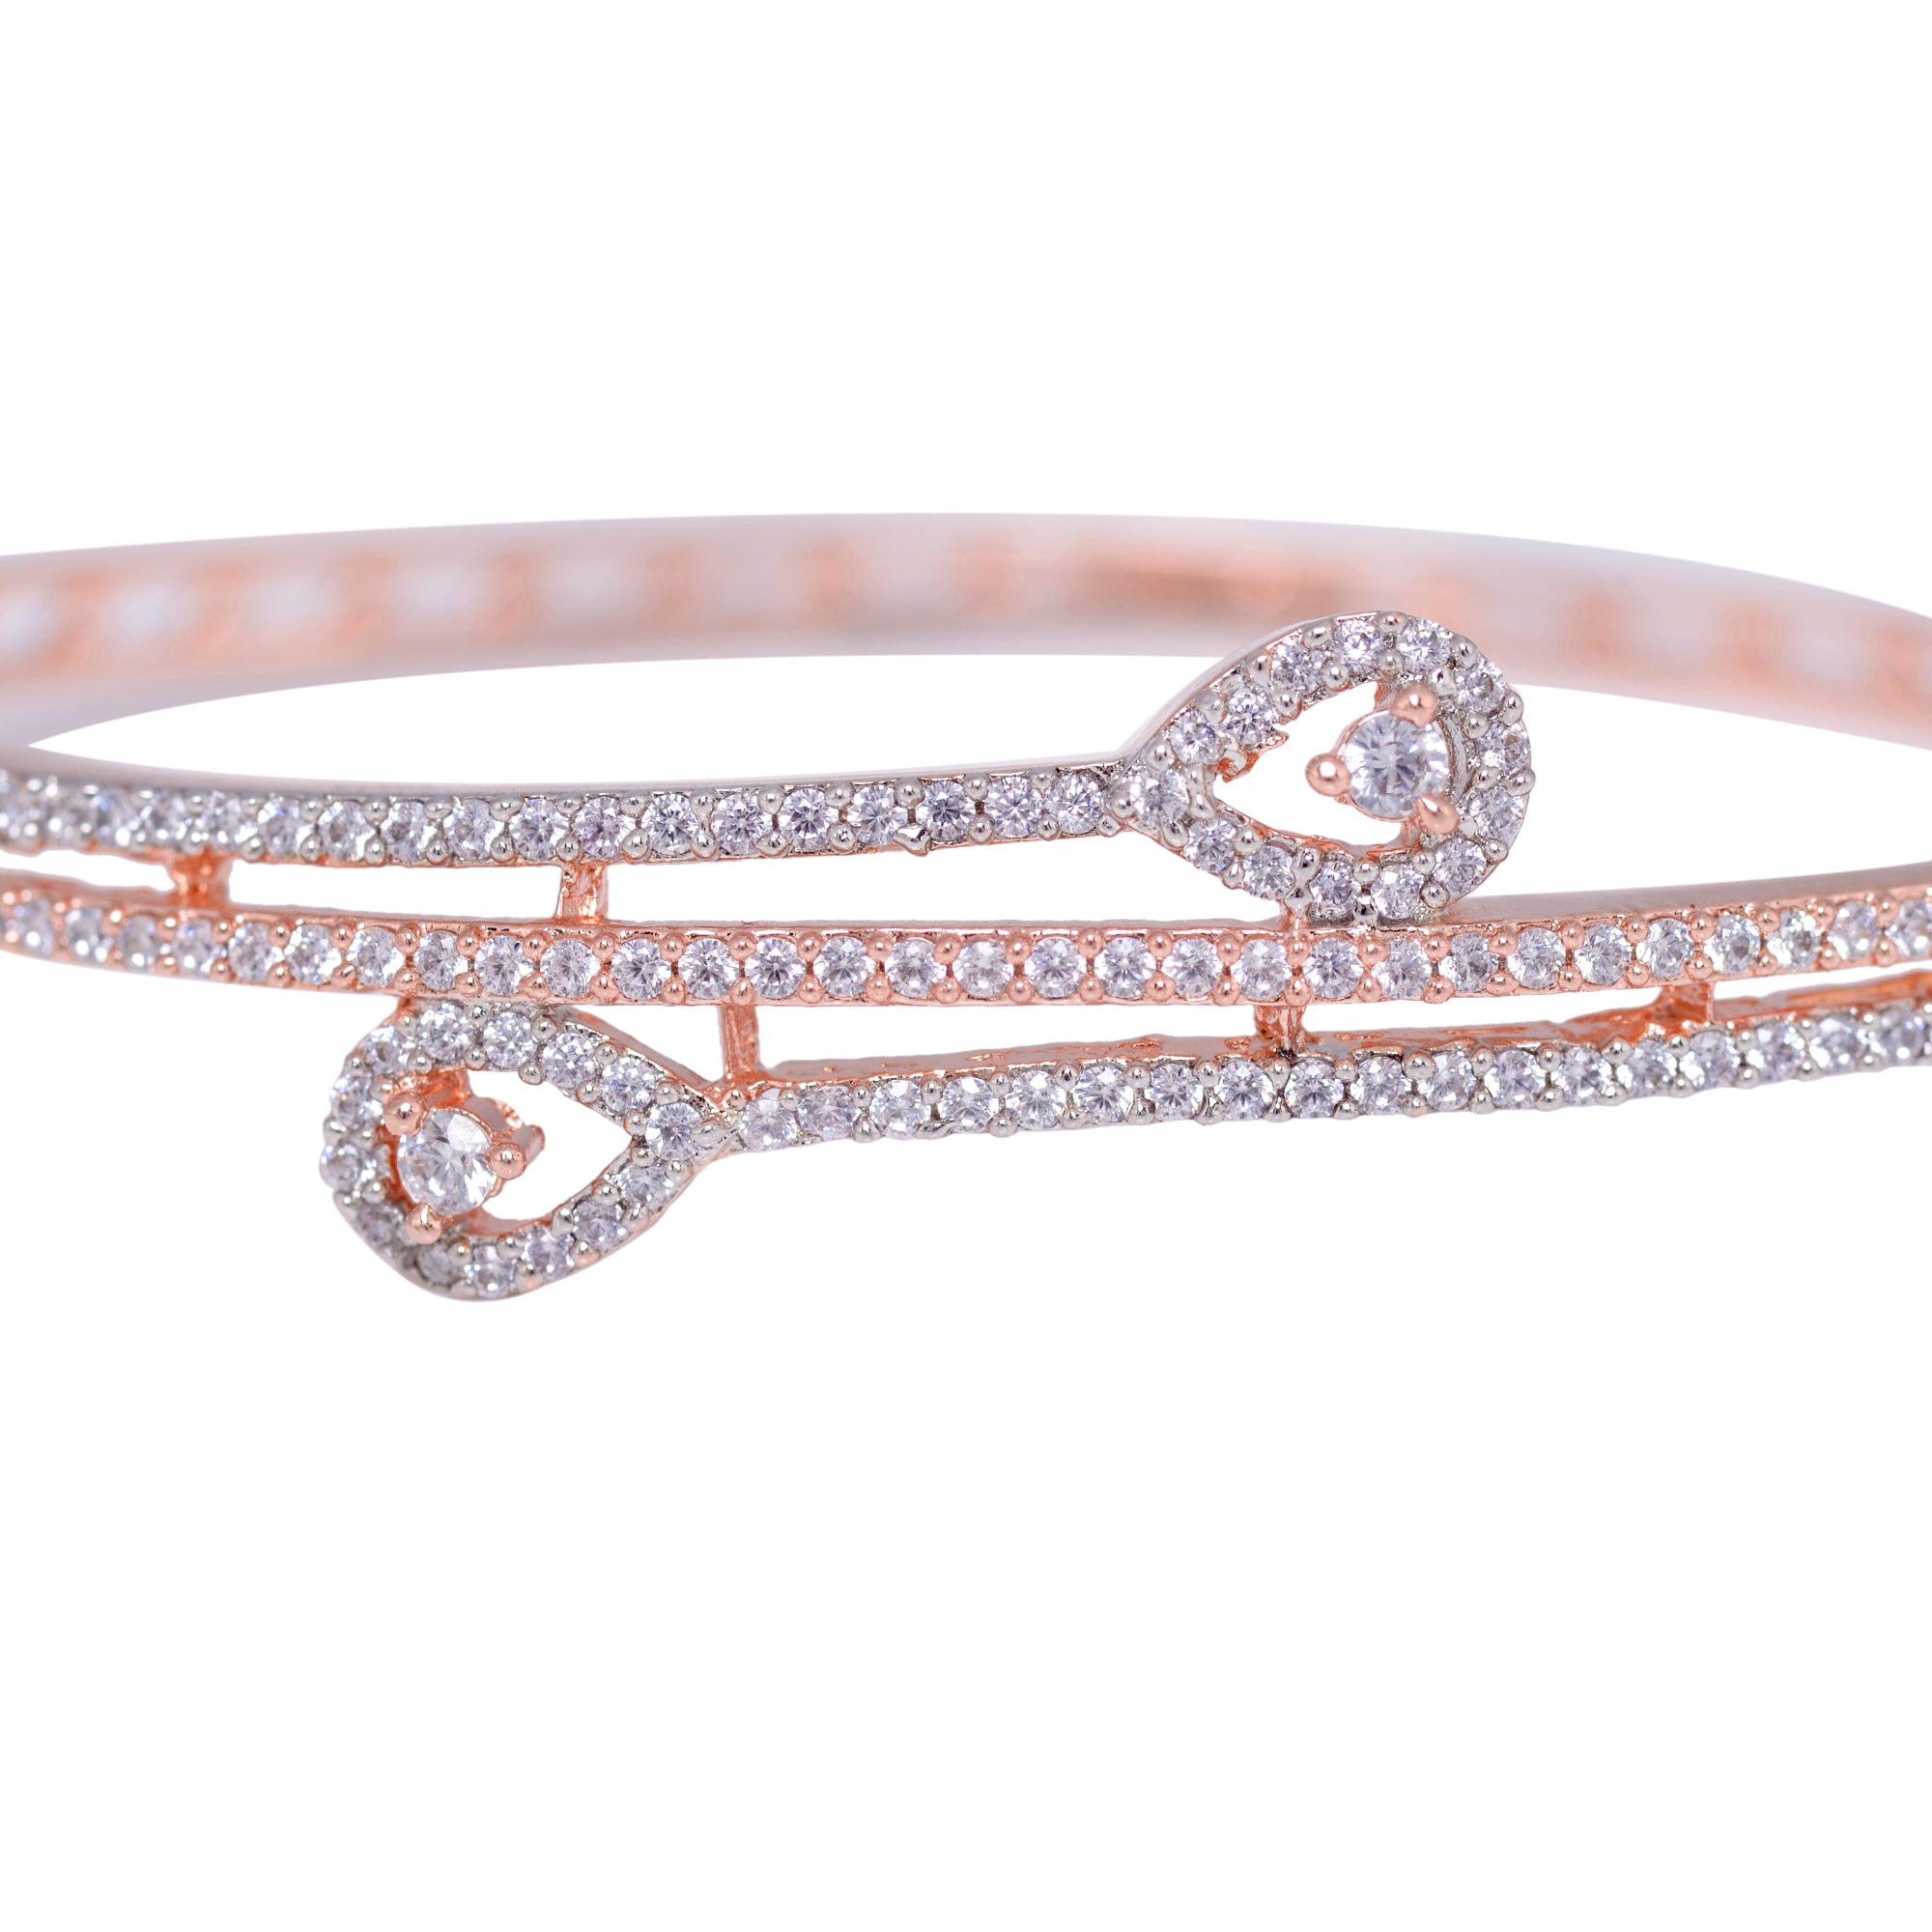 Stylish Modern Handcrafted Bracelet Rose Gold Plated For Women And Girls - Saraf Rs Jewellery